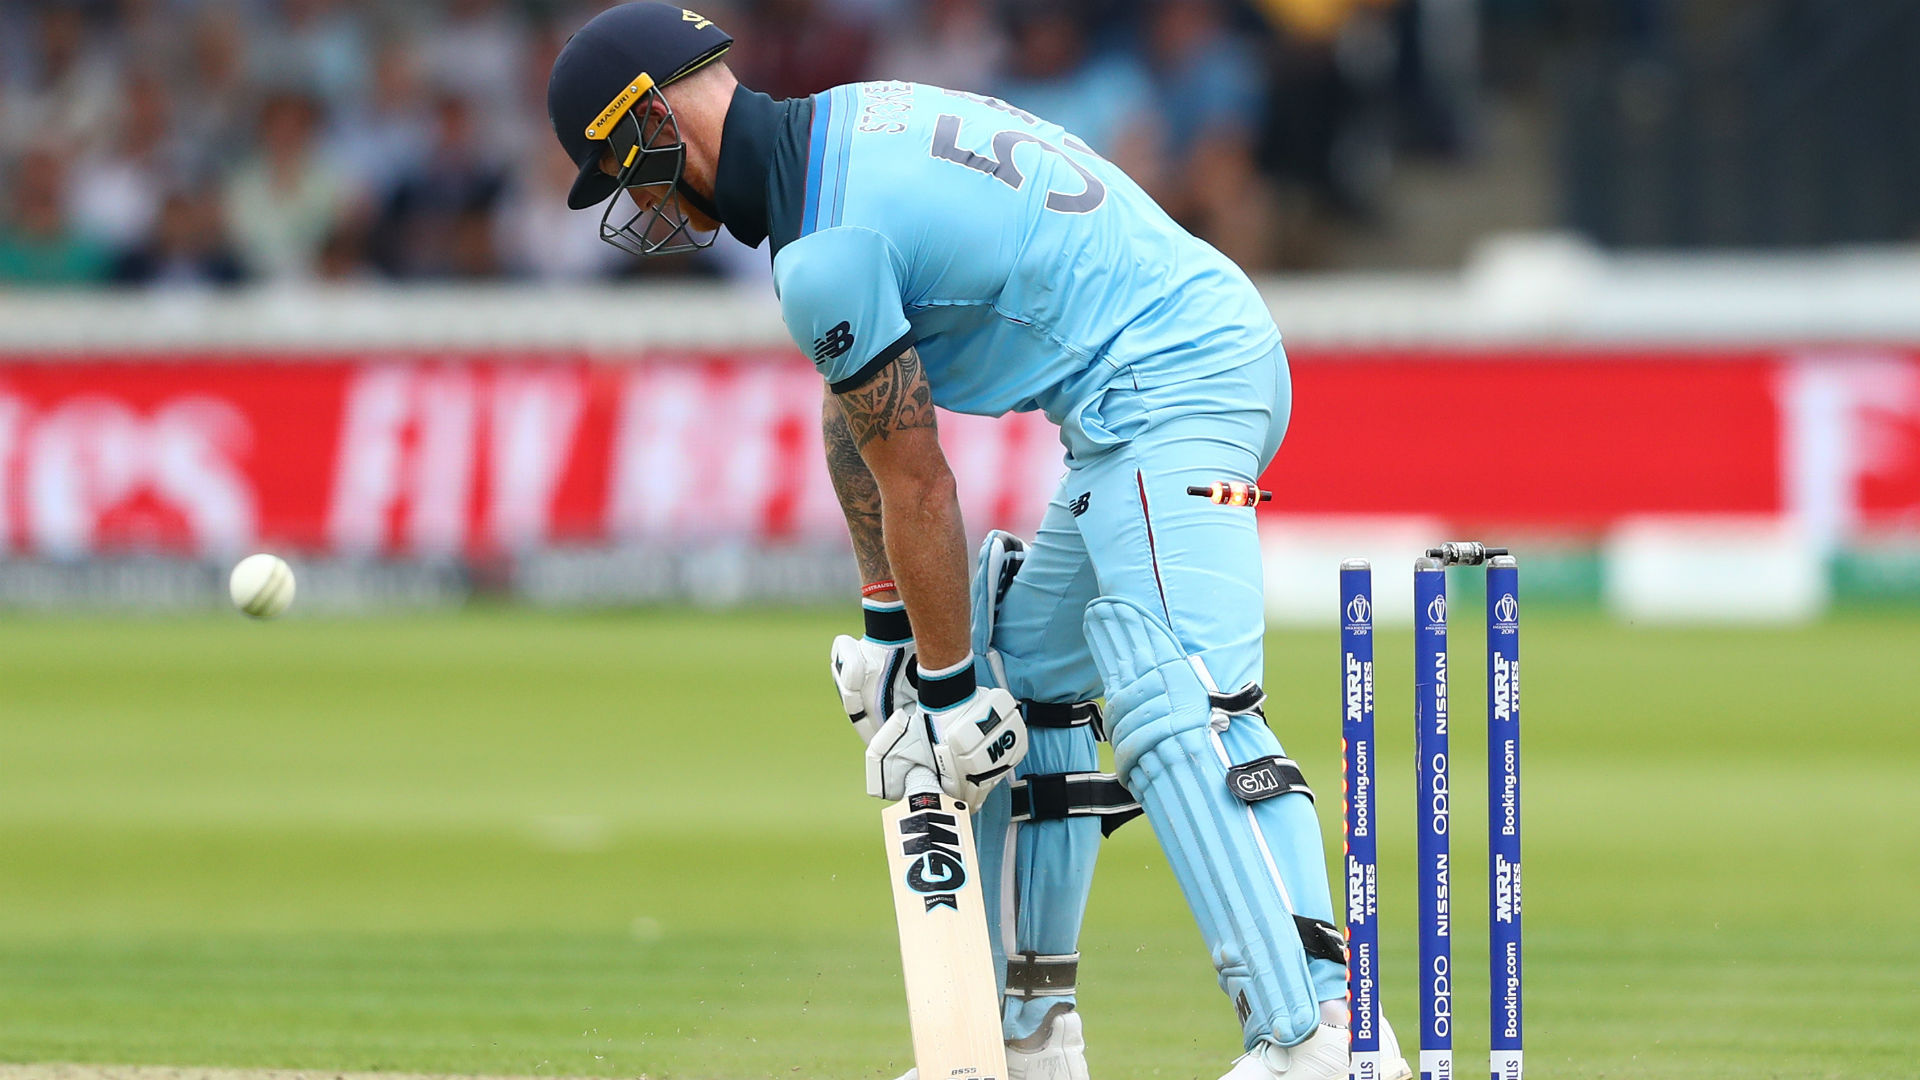 It has been a troubling seven days for Cricket World Cup hosts England, who are in grave danger of missing out on the semi-finals.